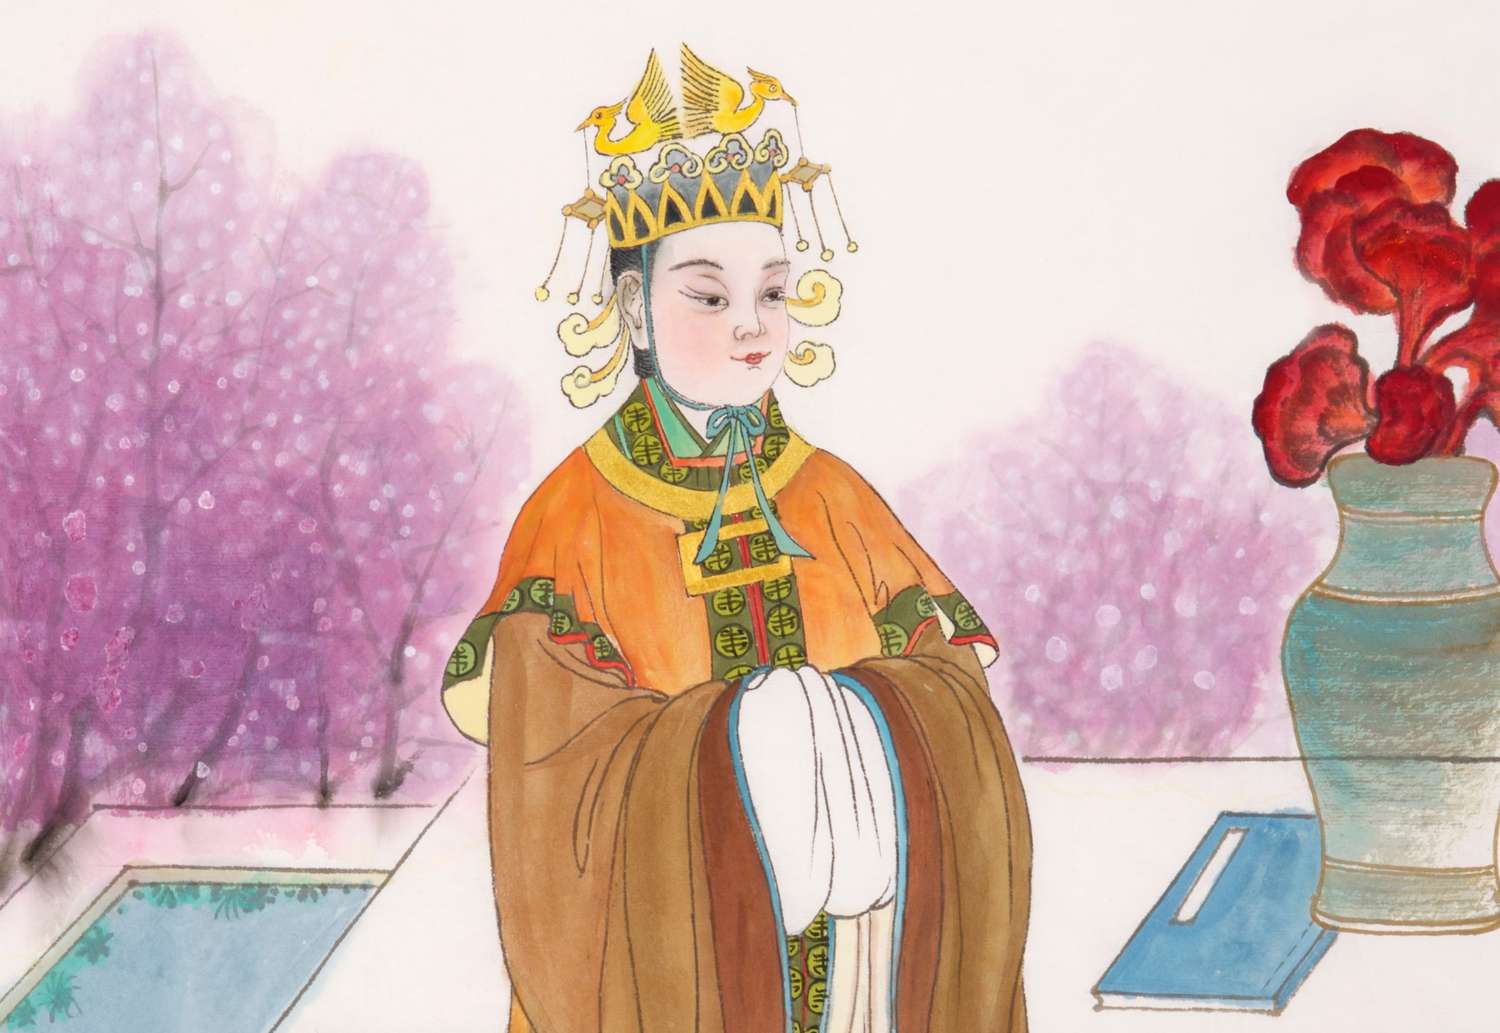 10 Most Vicious Female Rulers in History